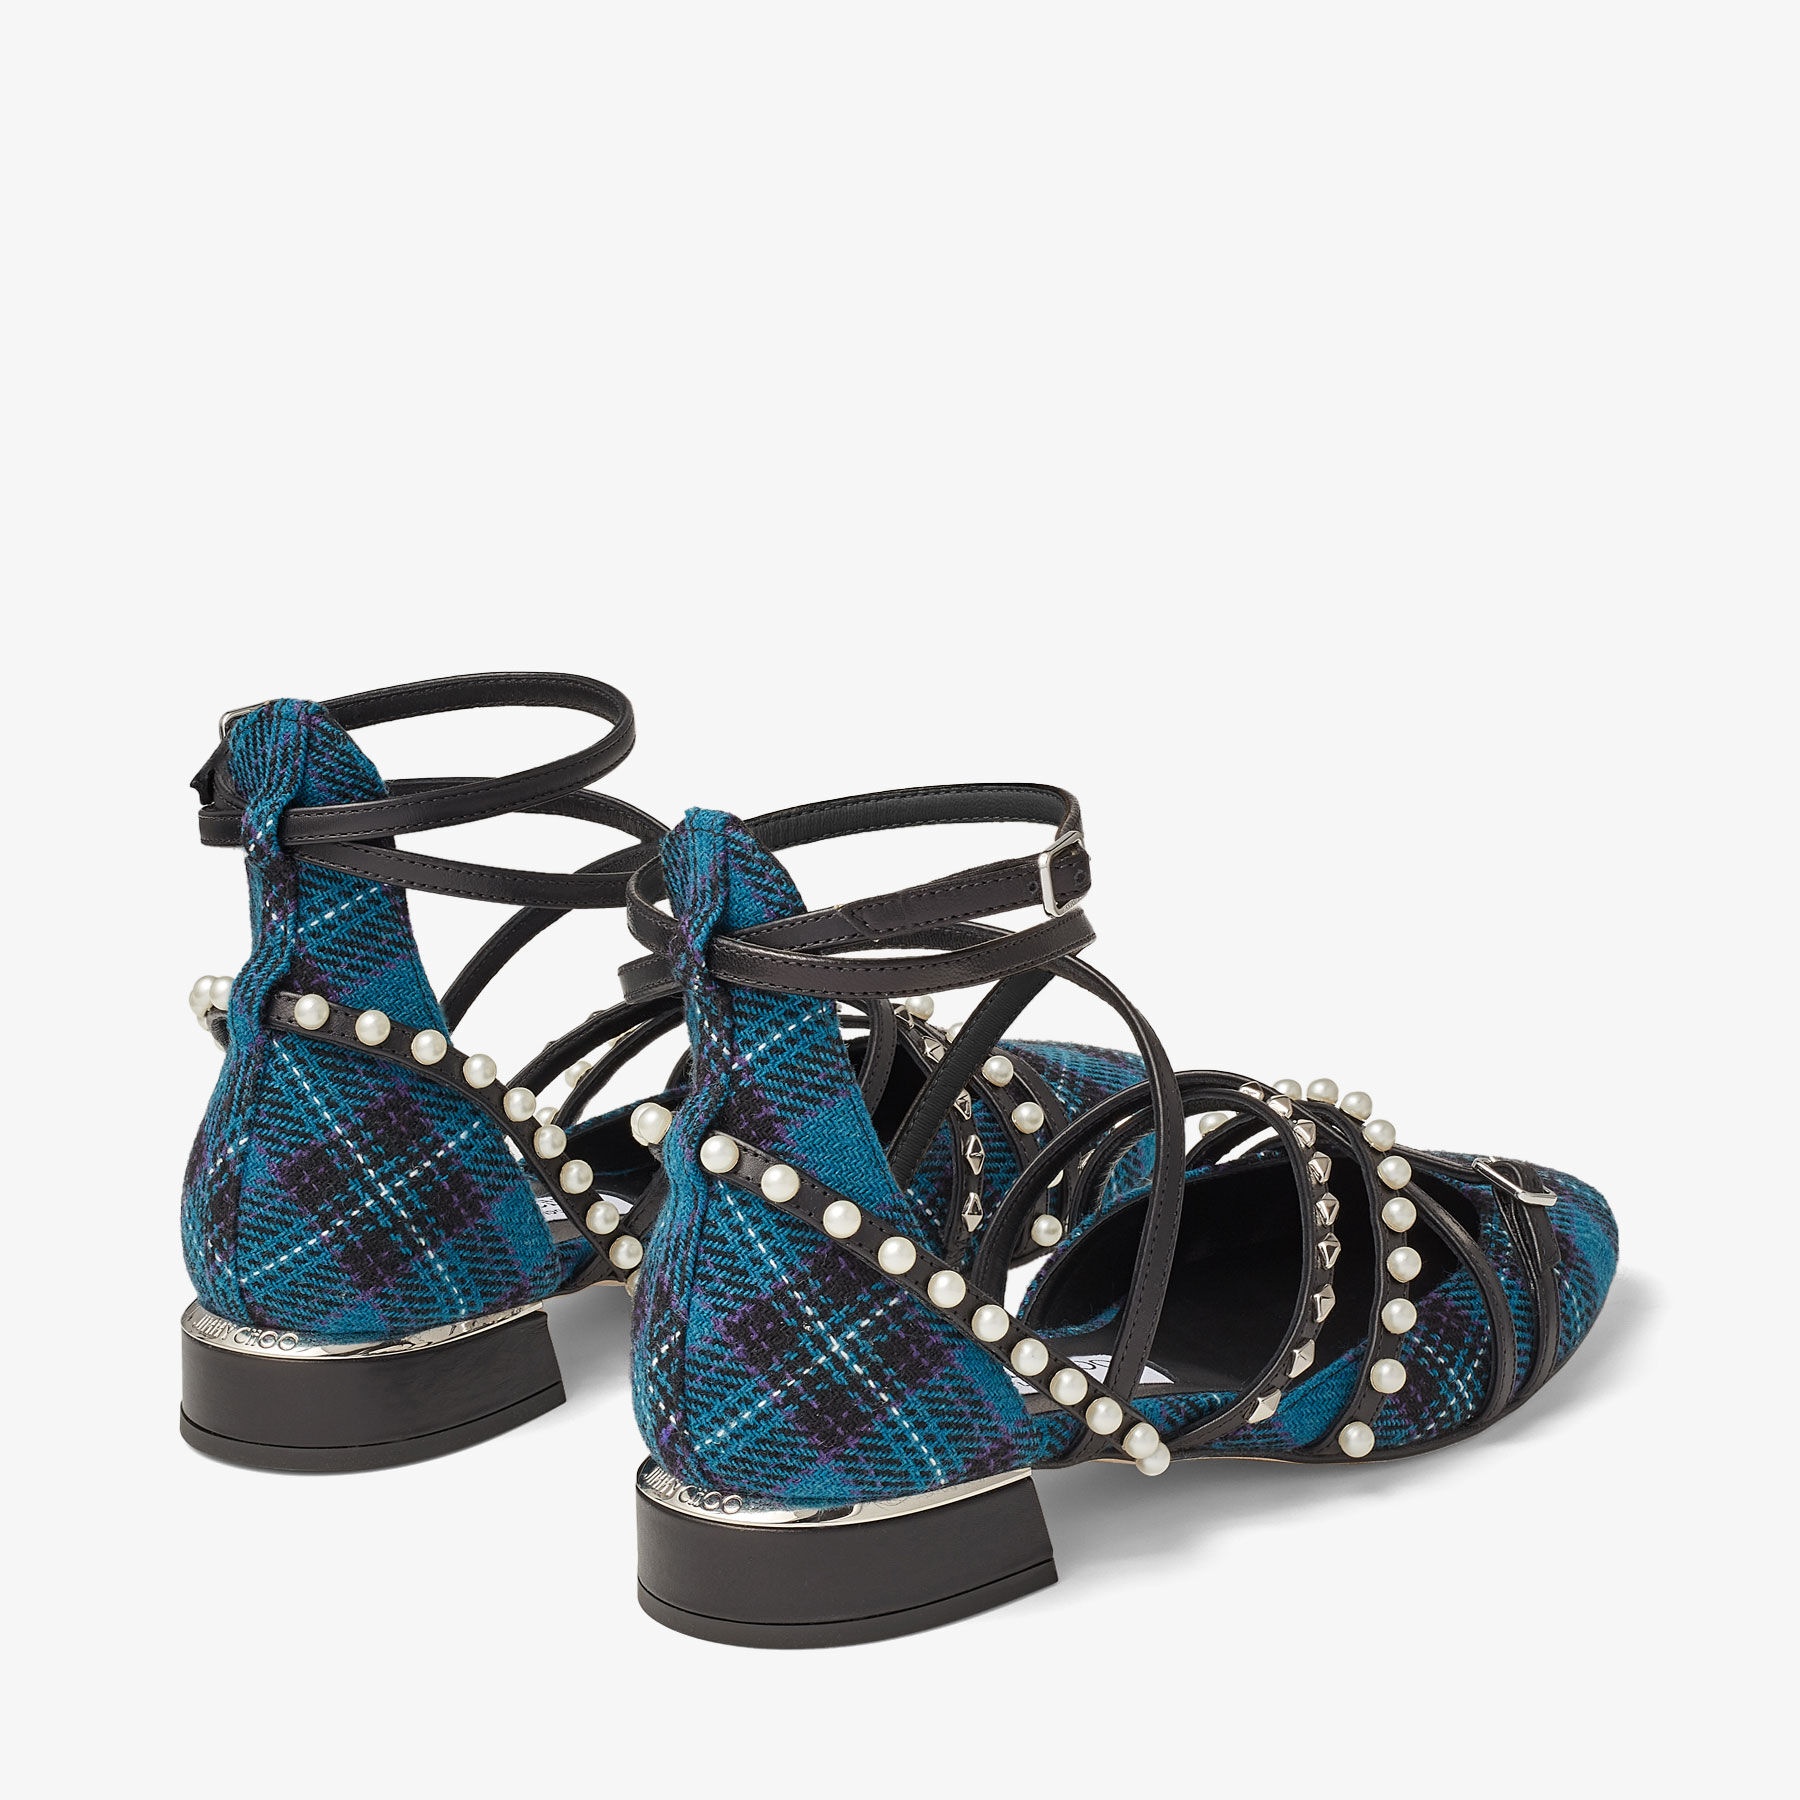 Celestia 25
Peacock Tartan Fabric Pumps with Pearls and Studs - 5